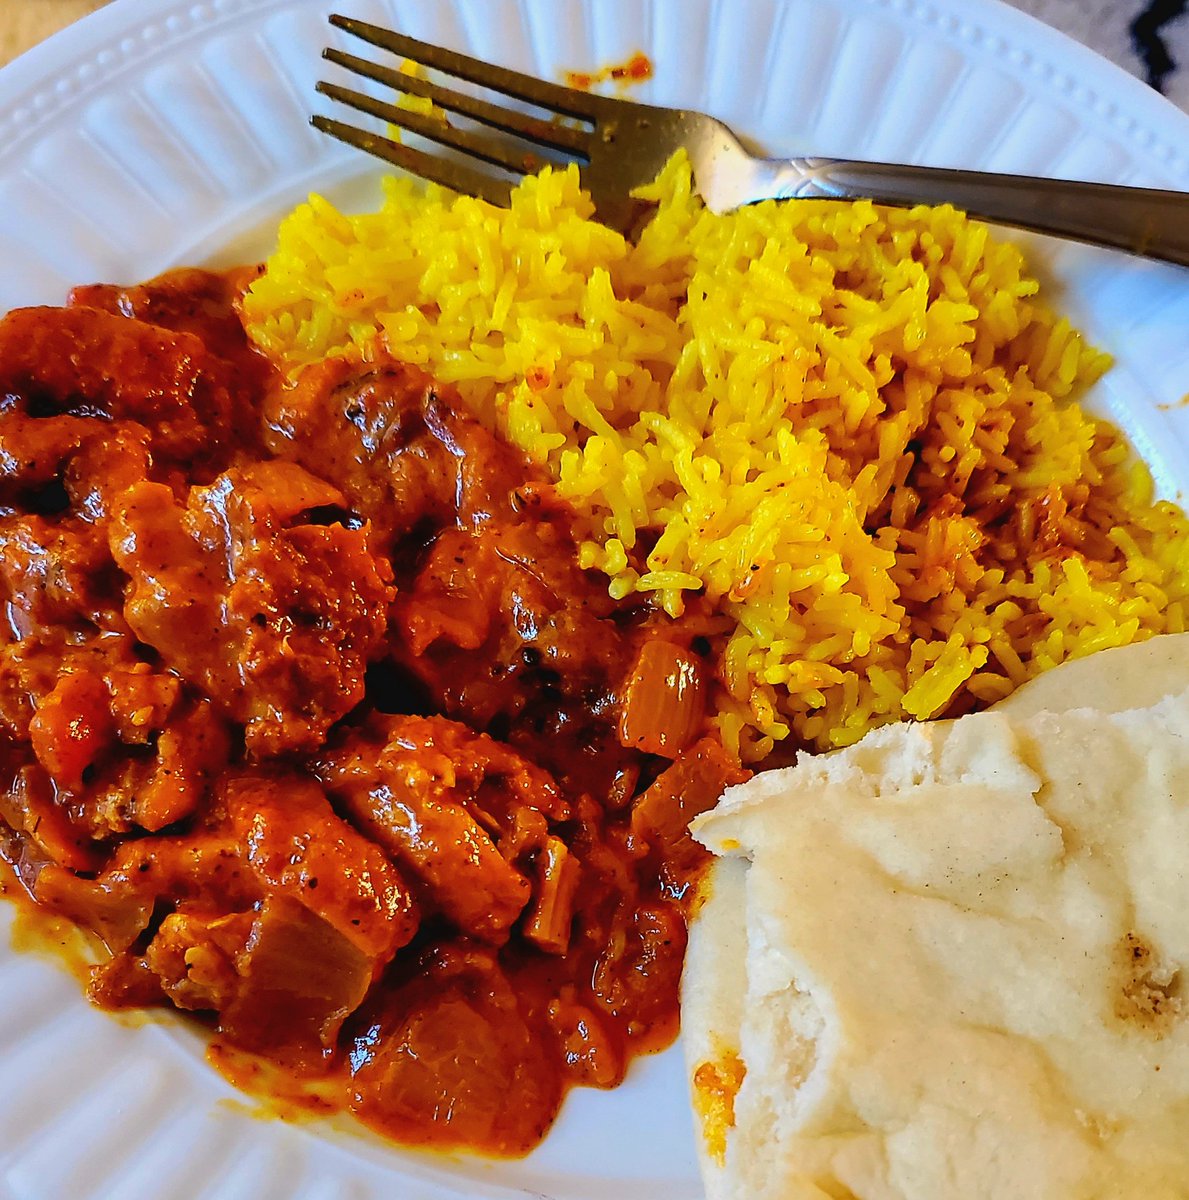 Dinner tonight is @foodwishes Chicken Tikka Masala and Golden Butter rice. Only regret is buying off the shelf, national brand, naan. This meal deserved proper naan.